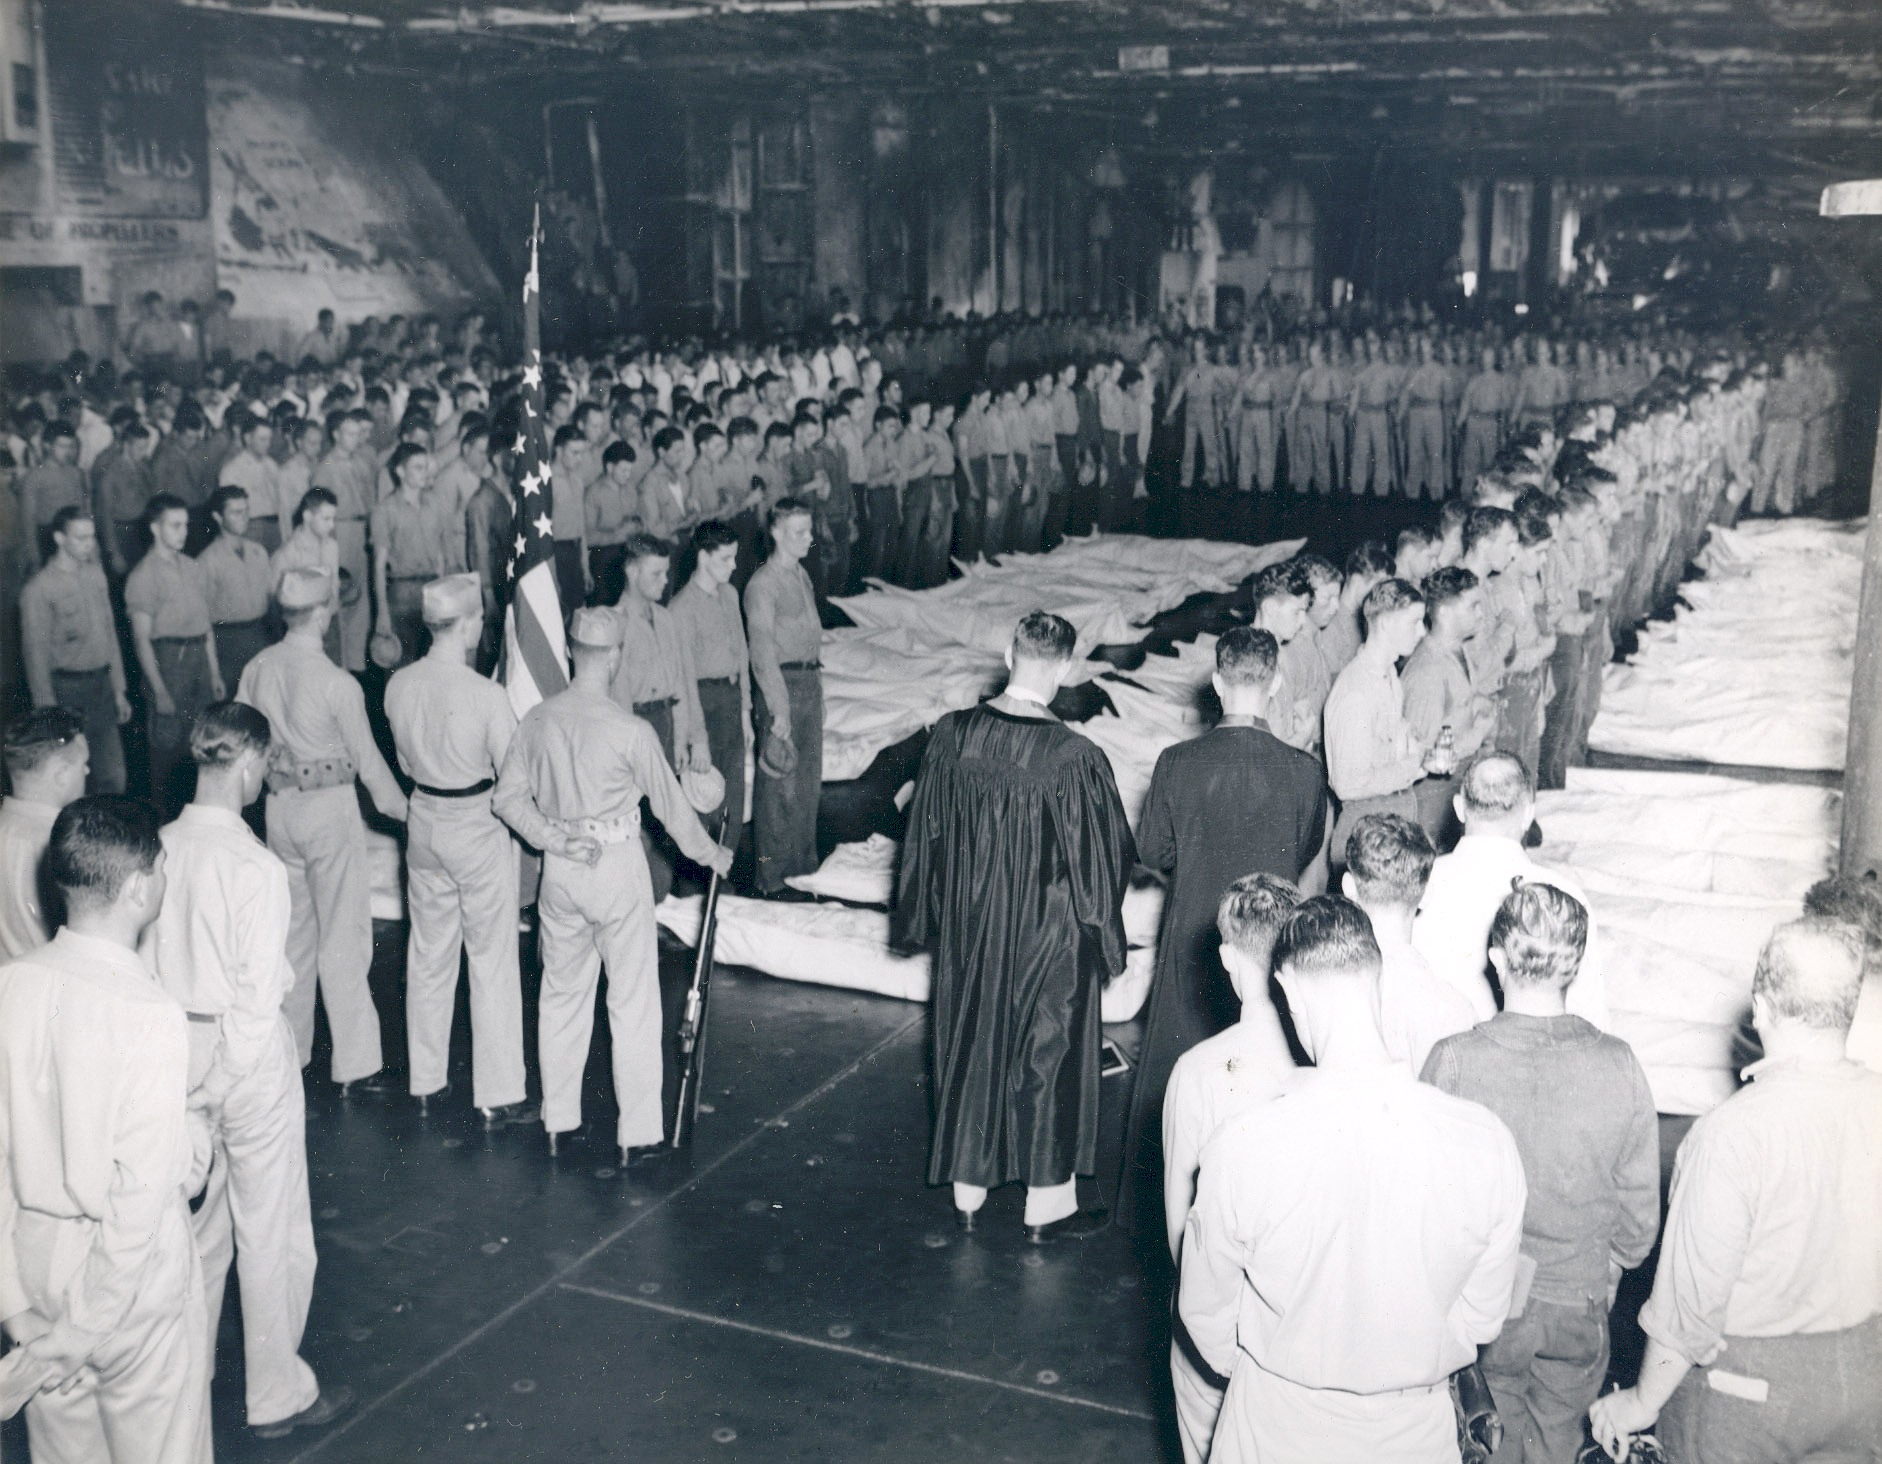 A burial party assembled on Intrepid's hangar deck in the Philippine Sea the day following the special attack of 25 Nov 1944, photo 2 of 5